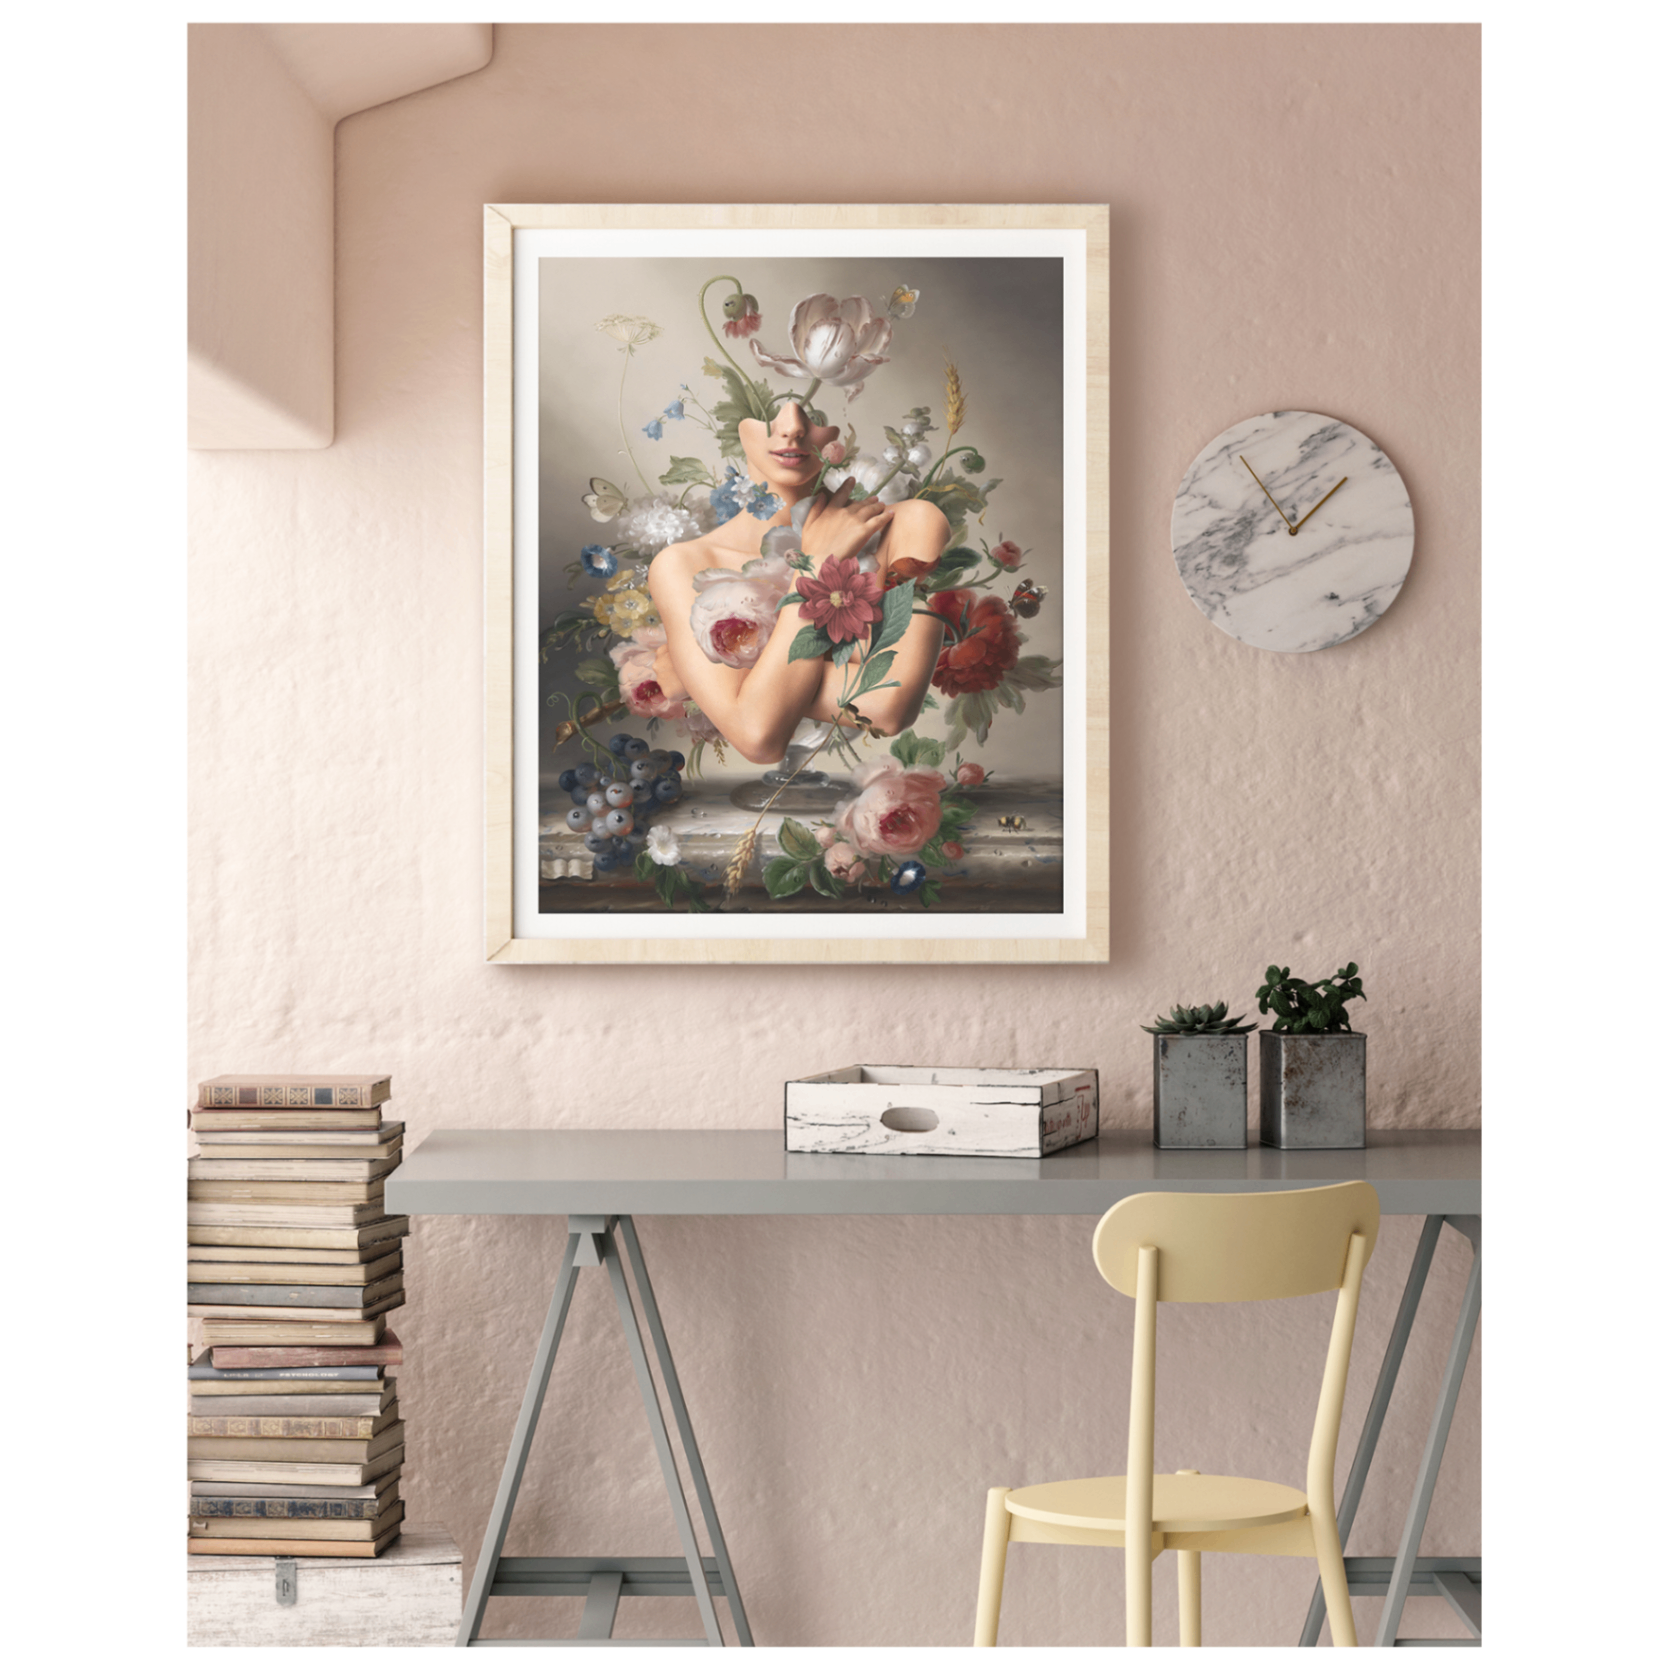 Captivating Intricacies Wooden Framed Print